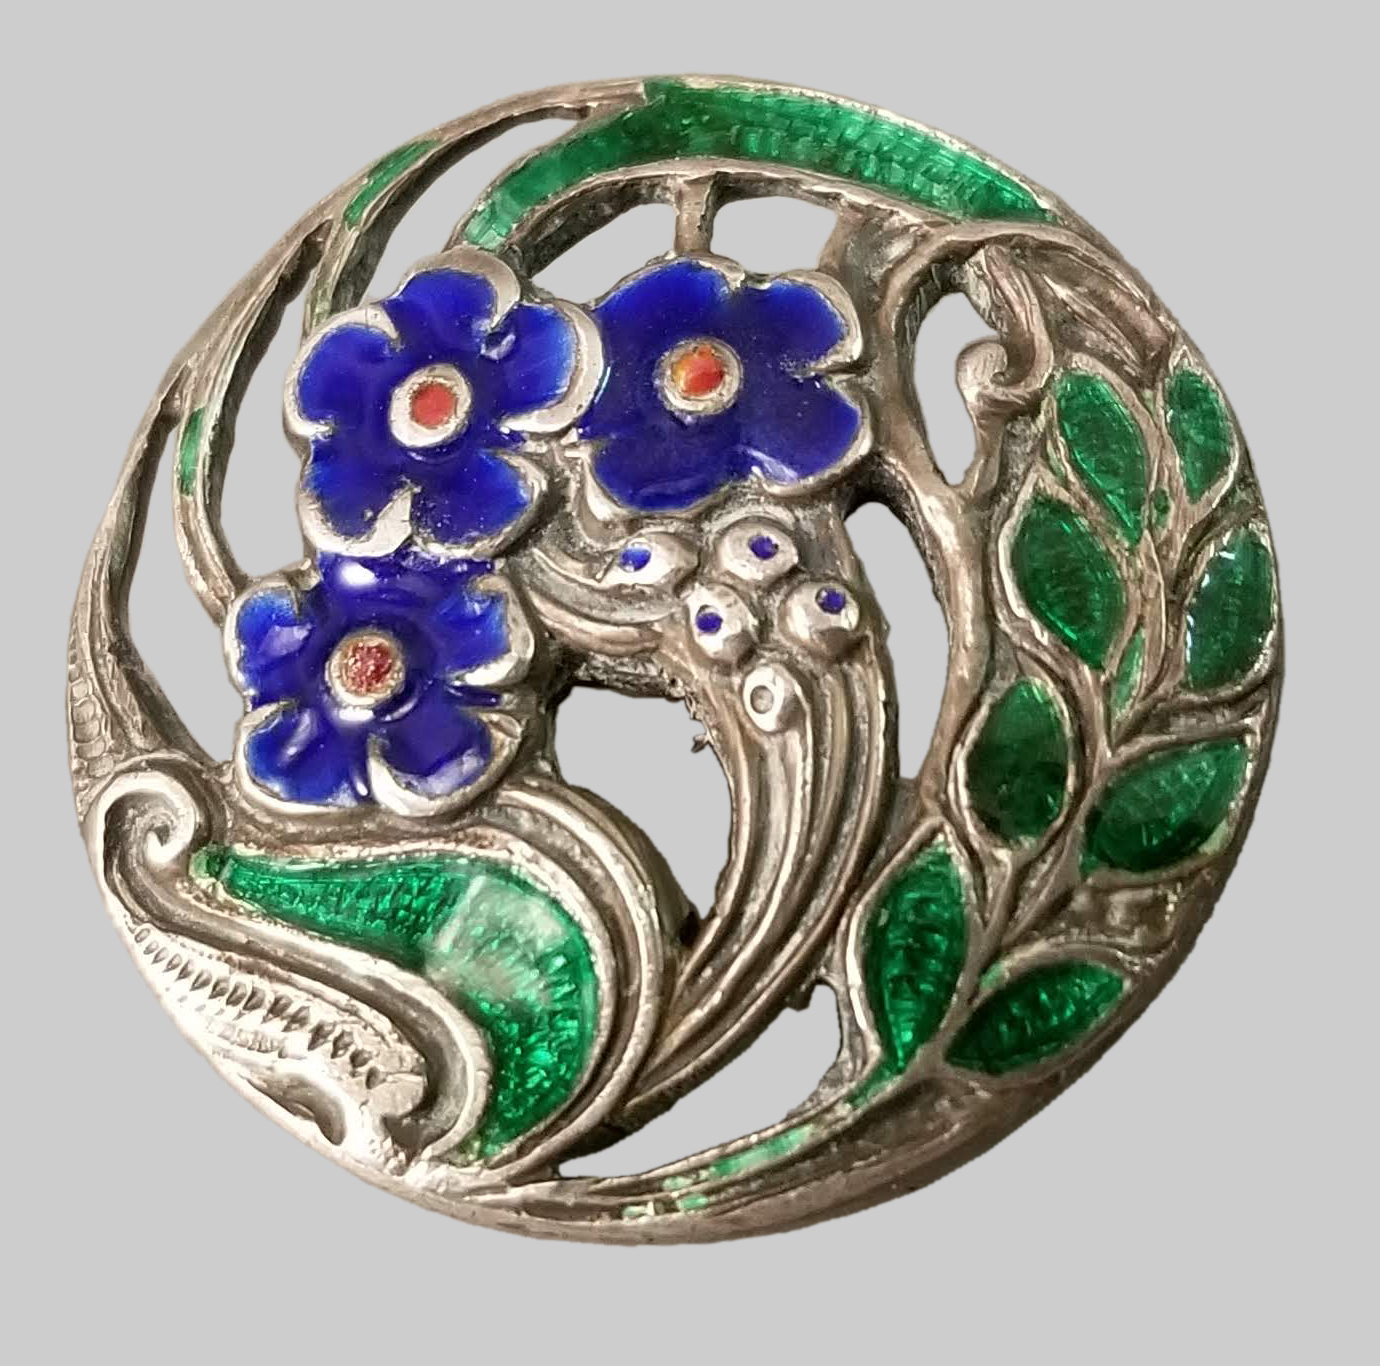 Fig. 4a - Harry Synyer and Charles Joseph Beddoes, Buttons with Forget-me-nots, 1900, sterling silver and enamel, TRRF Collection.